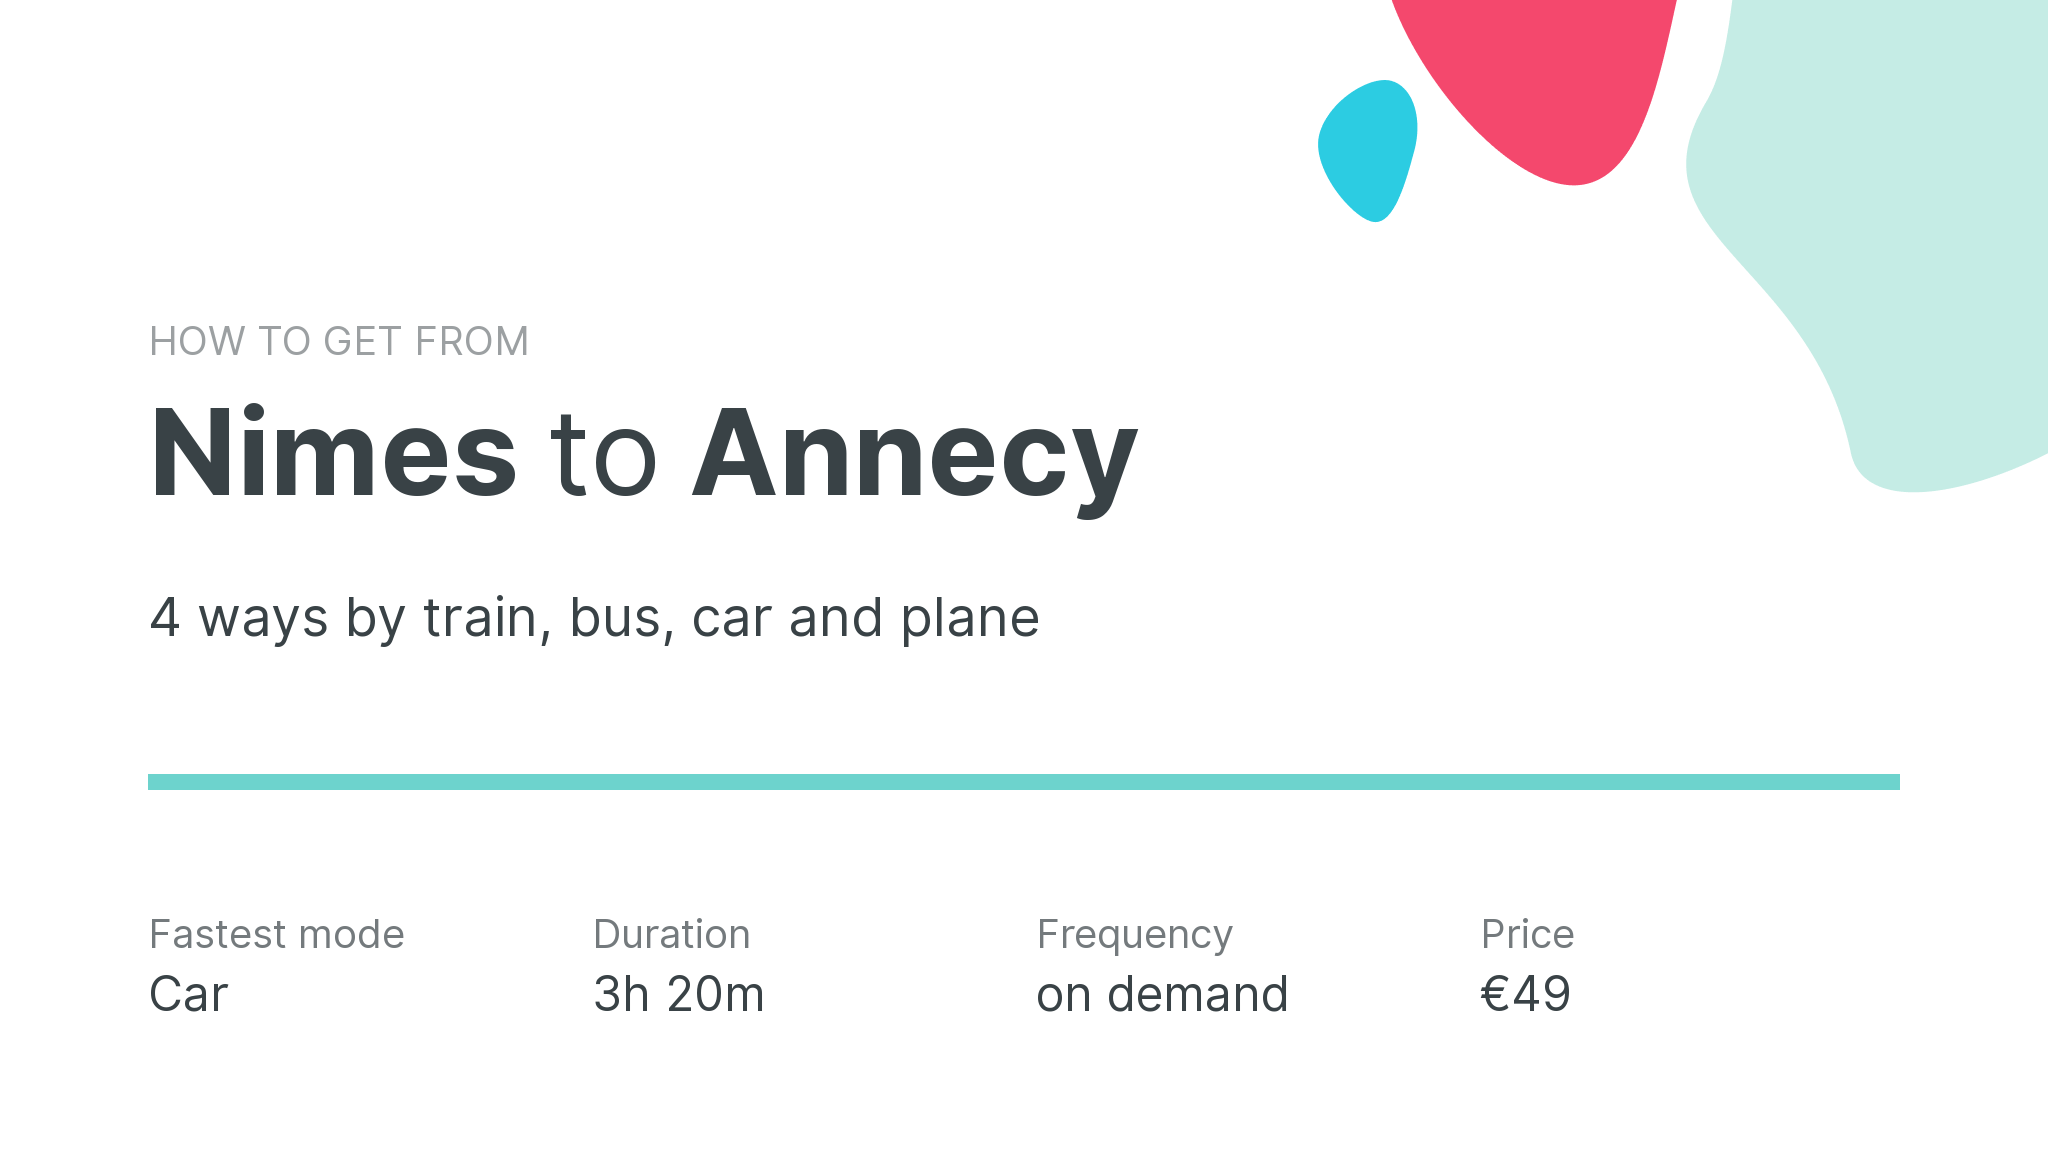 How do I get from Nimes to Annecy